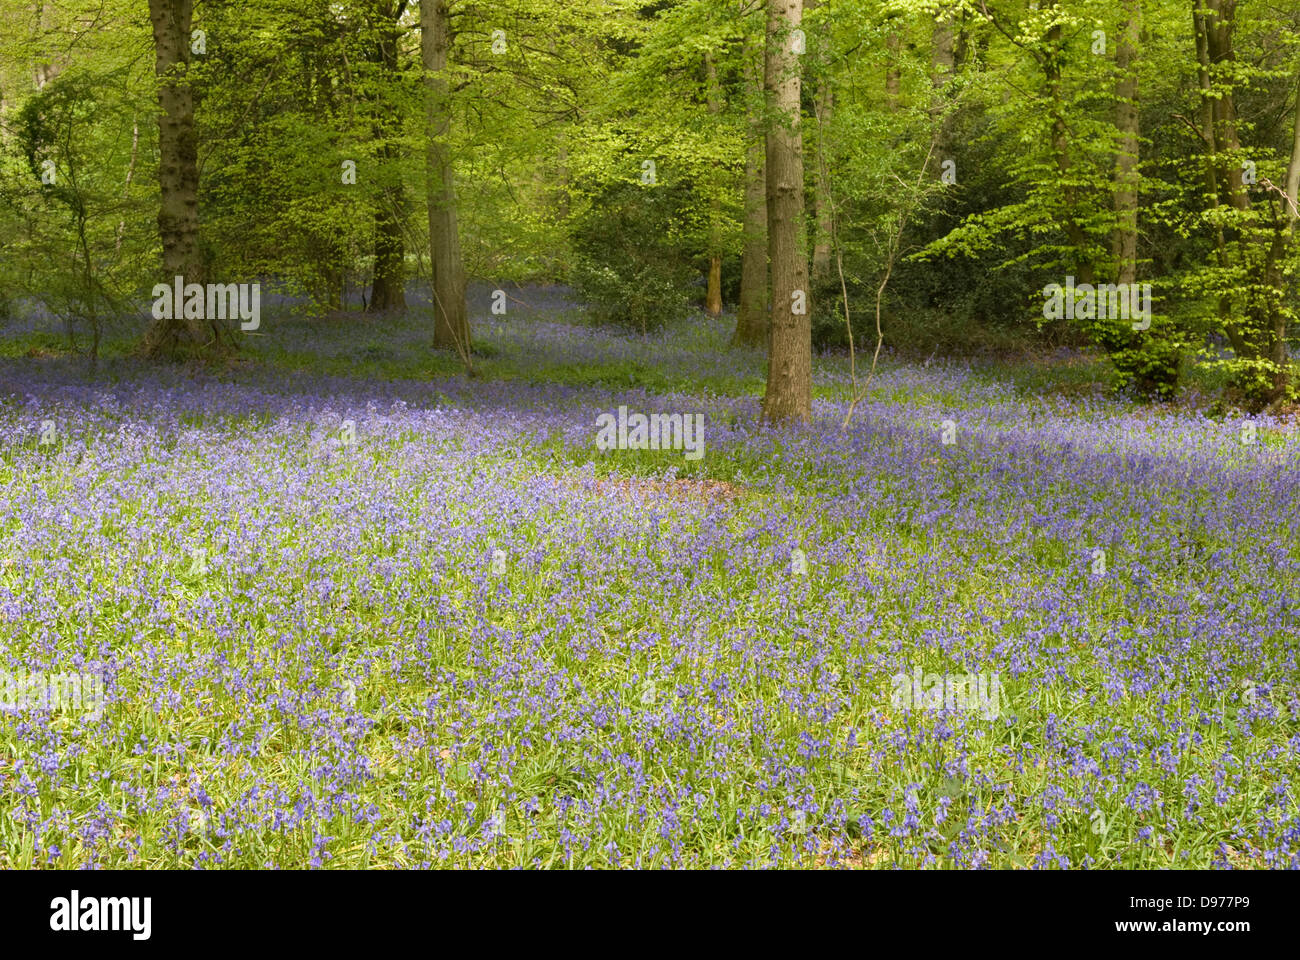 Bluebells, Hyacinthoides non-scripta, growing in mixed woodland in ...